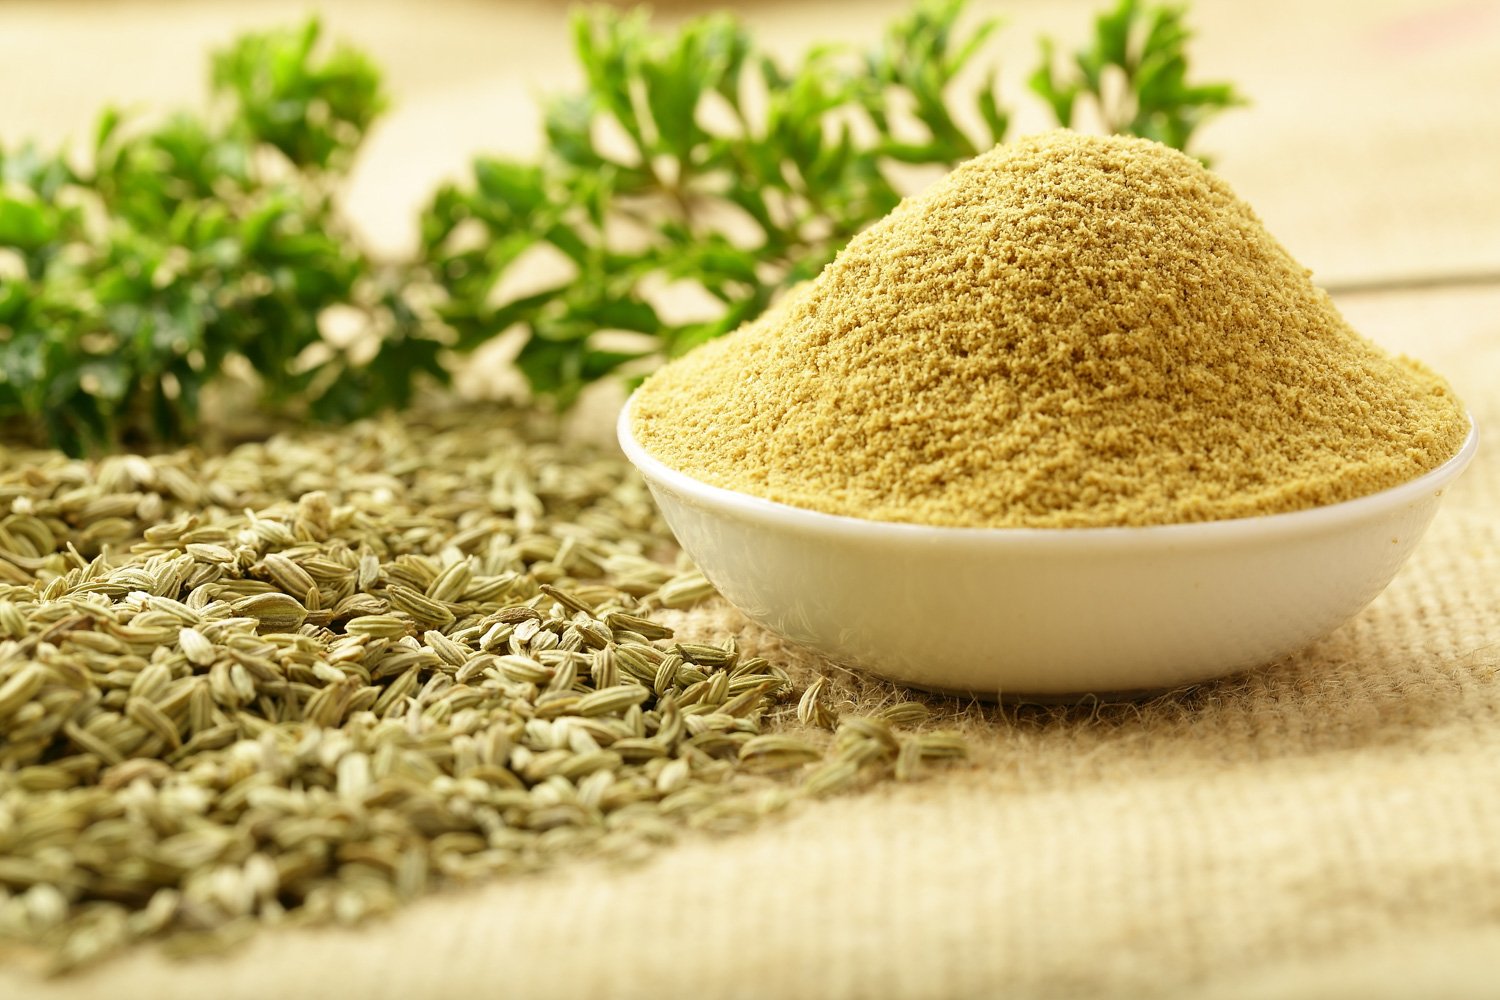 💖 If You Like Eating 27/35 of These Aphrodisiacs, You’re a 🥰 Real Romantic Fennel Seed Powder